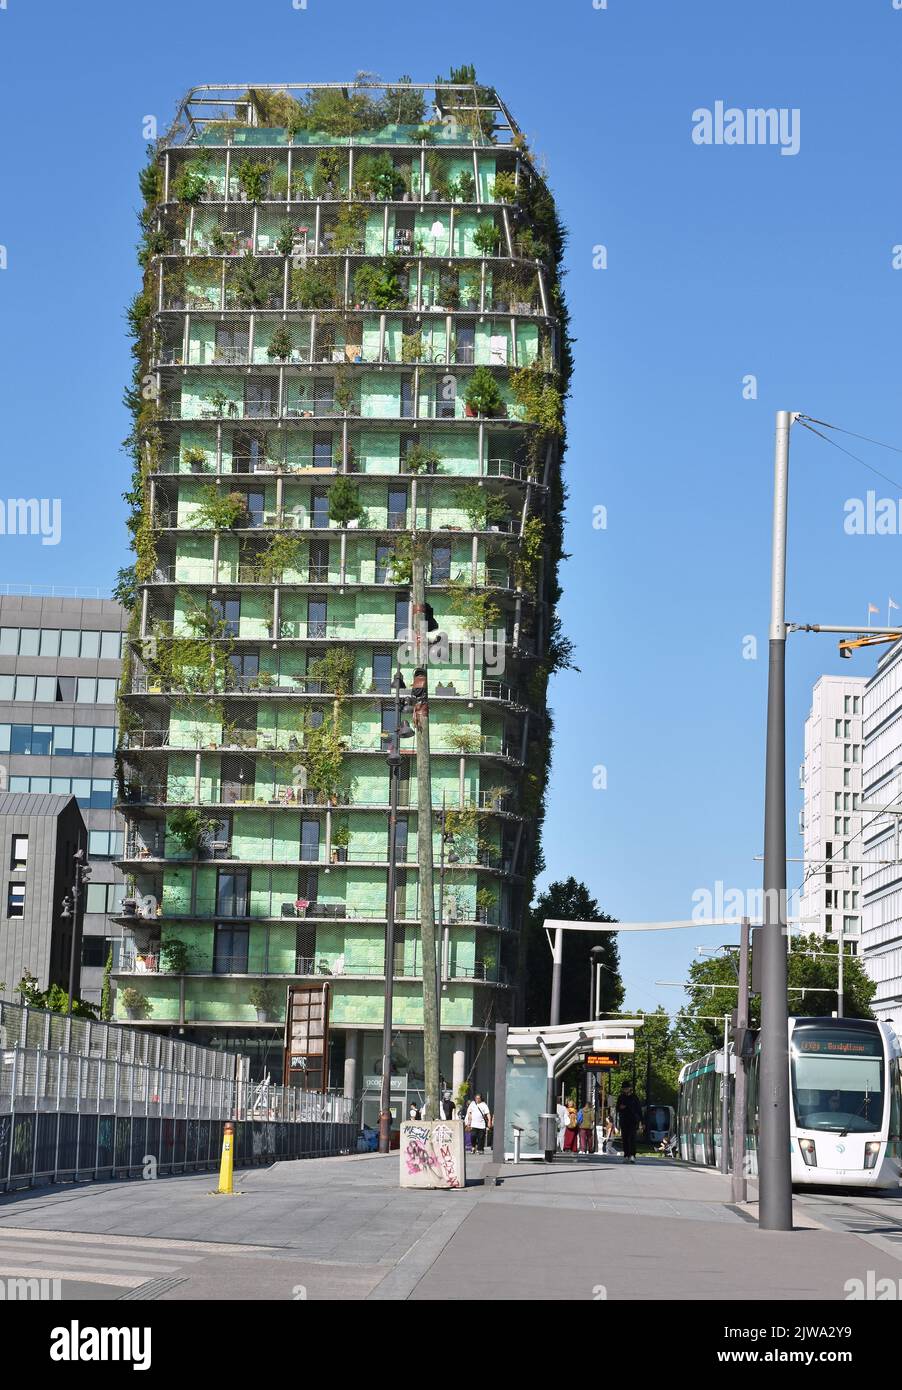 M6B2 de la Biodiversité, Biodiversity Tower, a 16 storey block of social housing apartments clad in steel netting planted with various plant types. Stock Photo